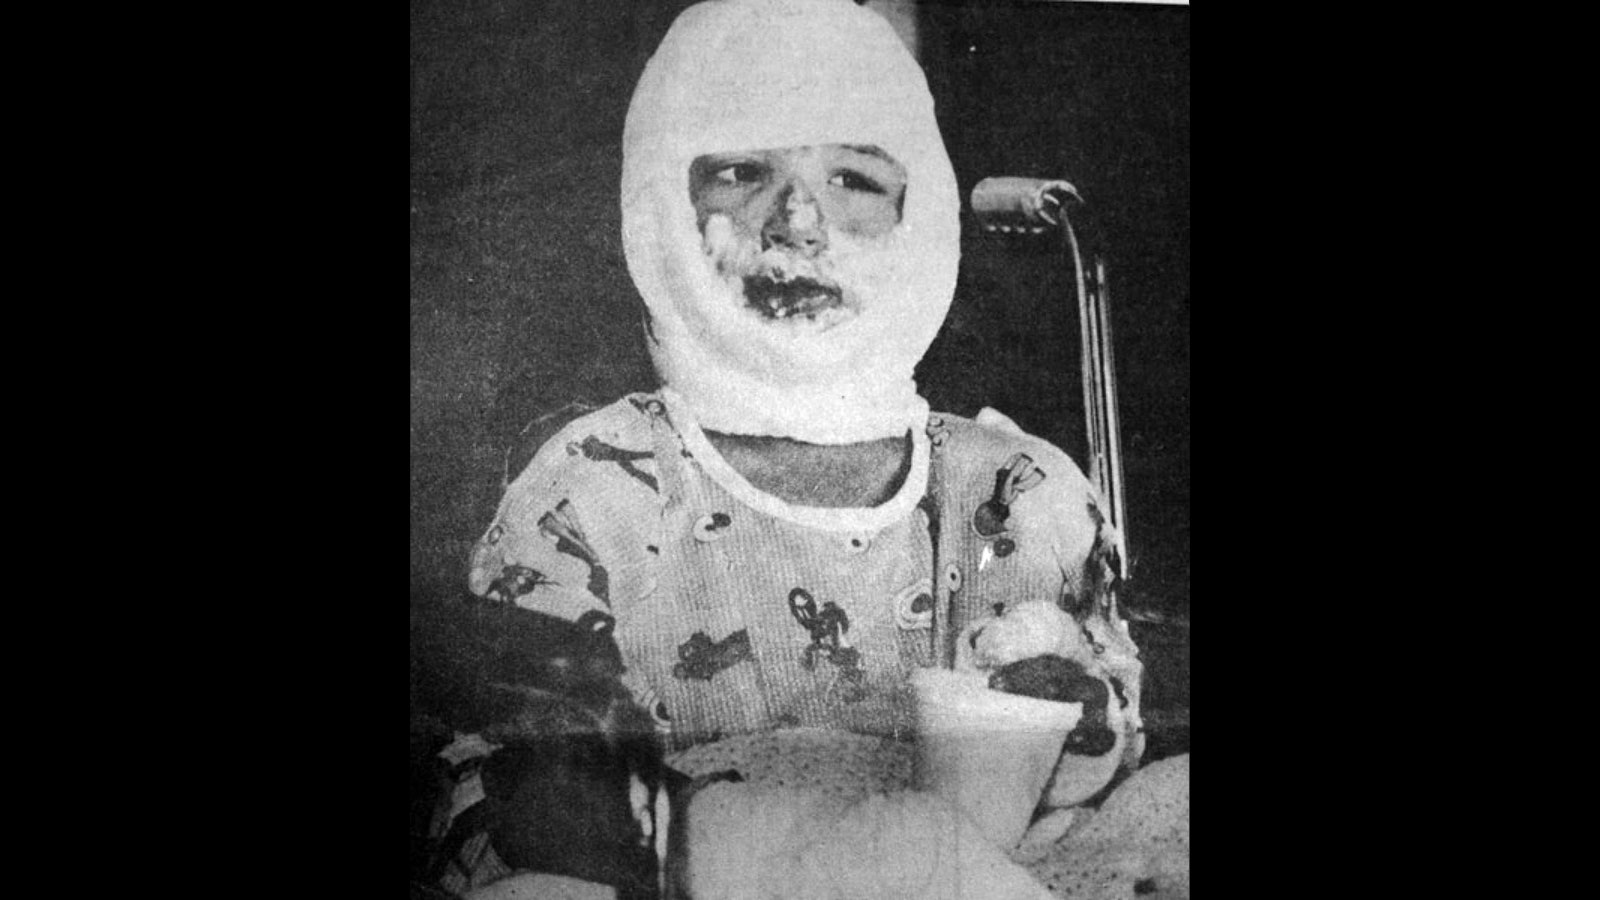 Ryan Taylor, 7, at the Montpelier Idaho hospital after the Cokeville bombing